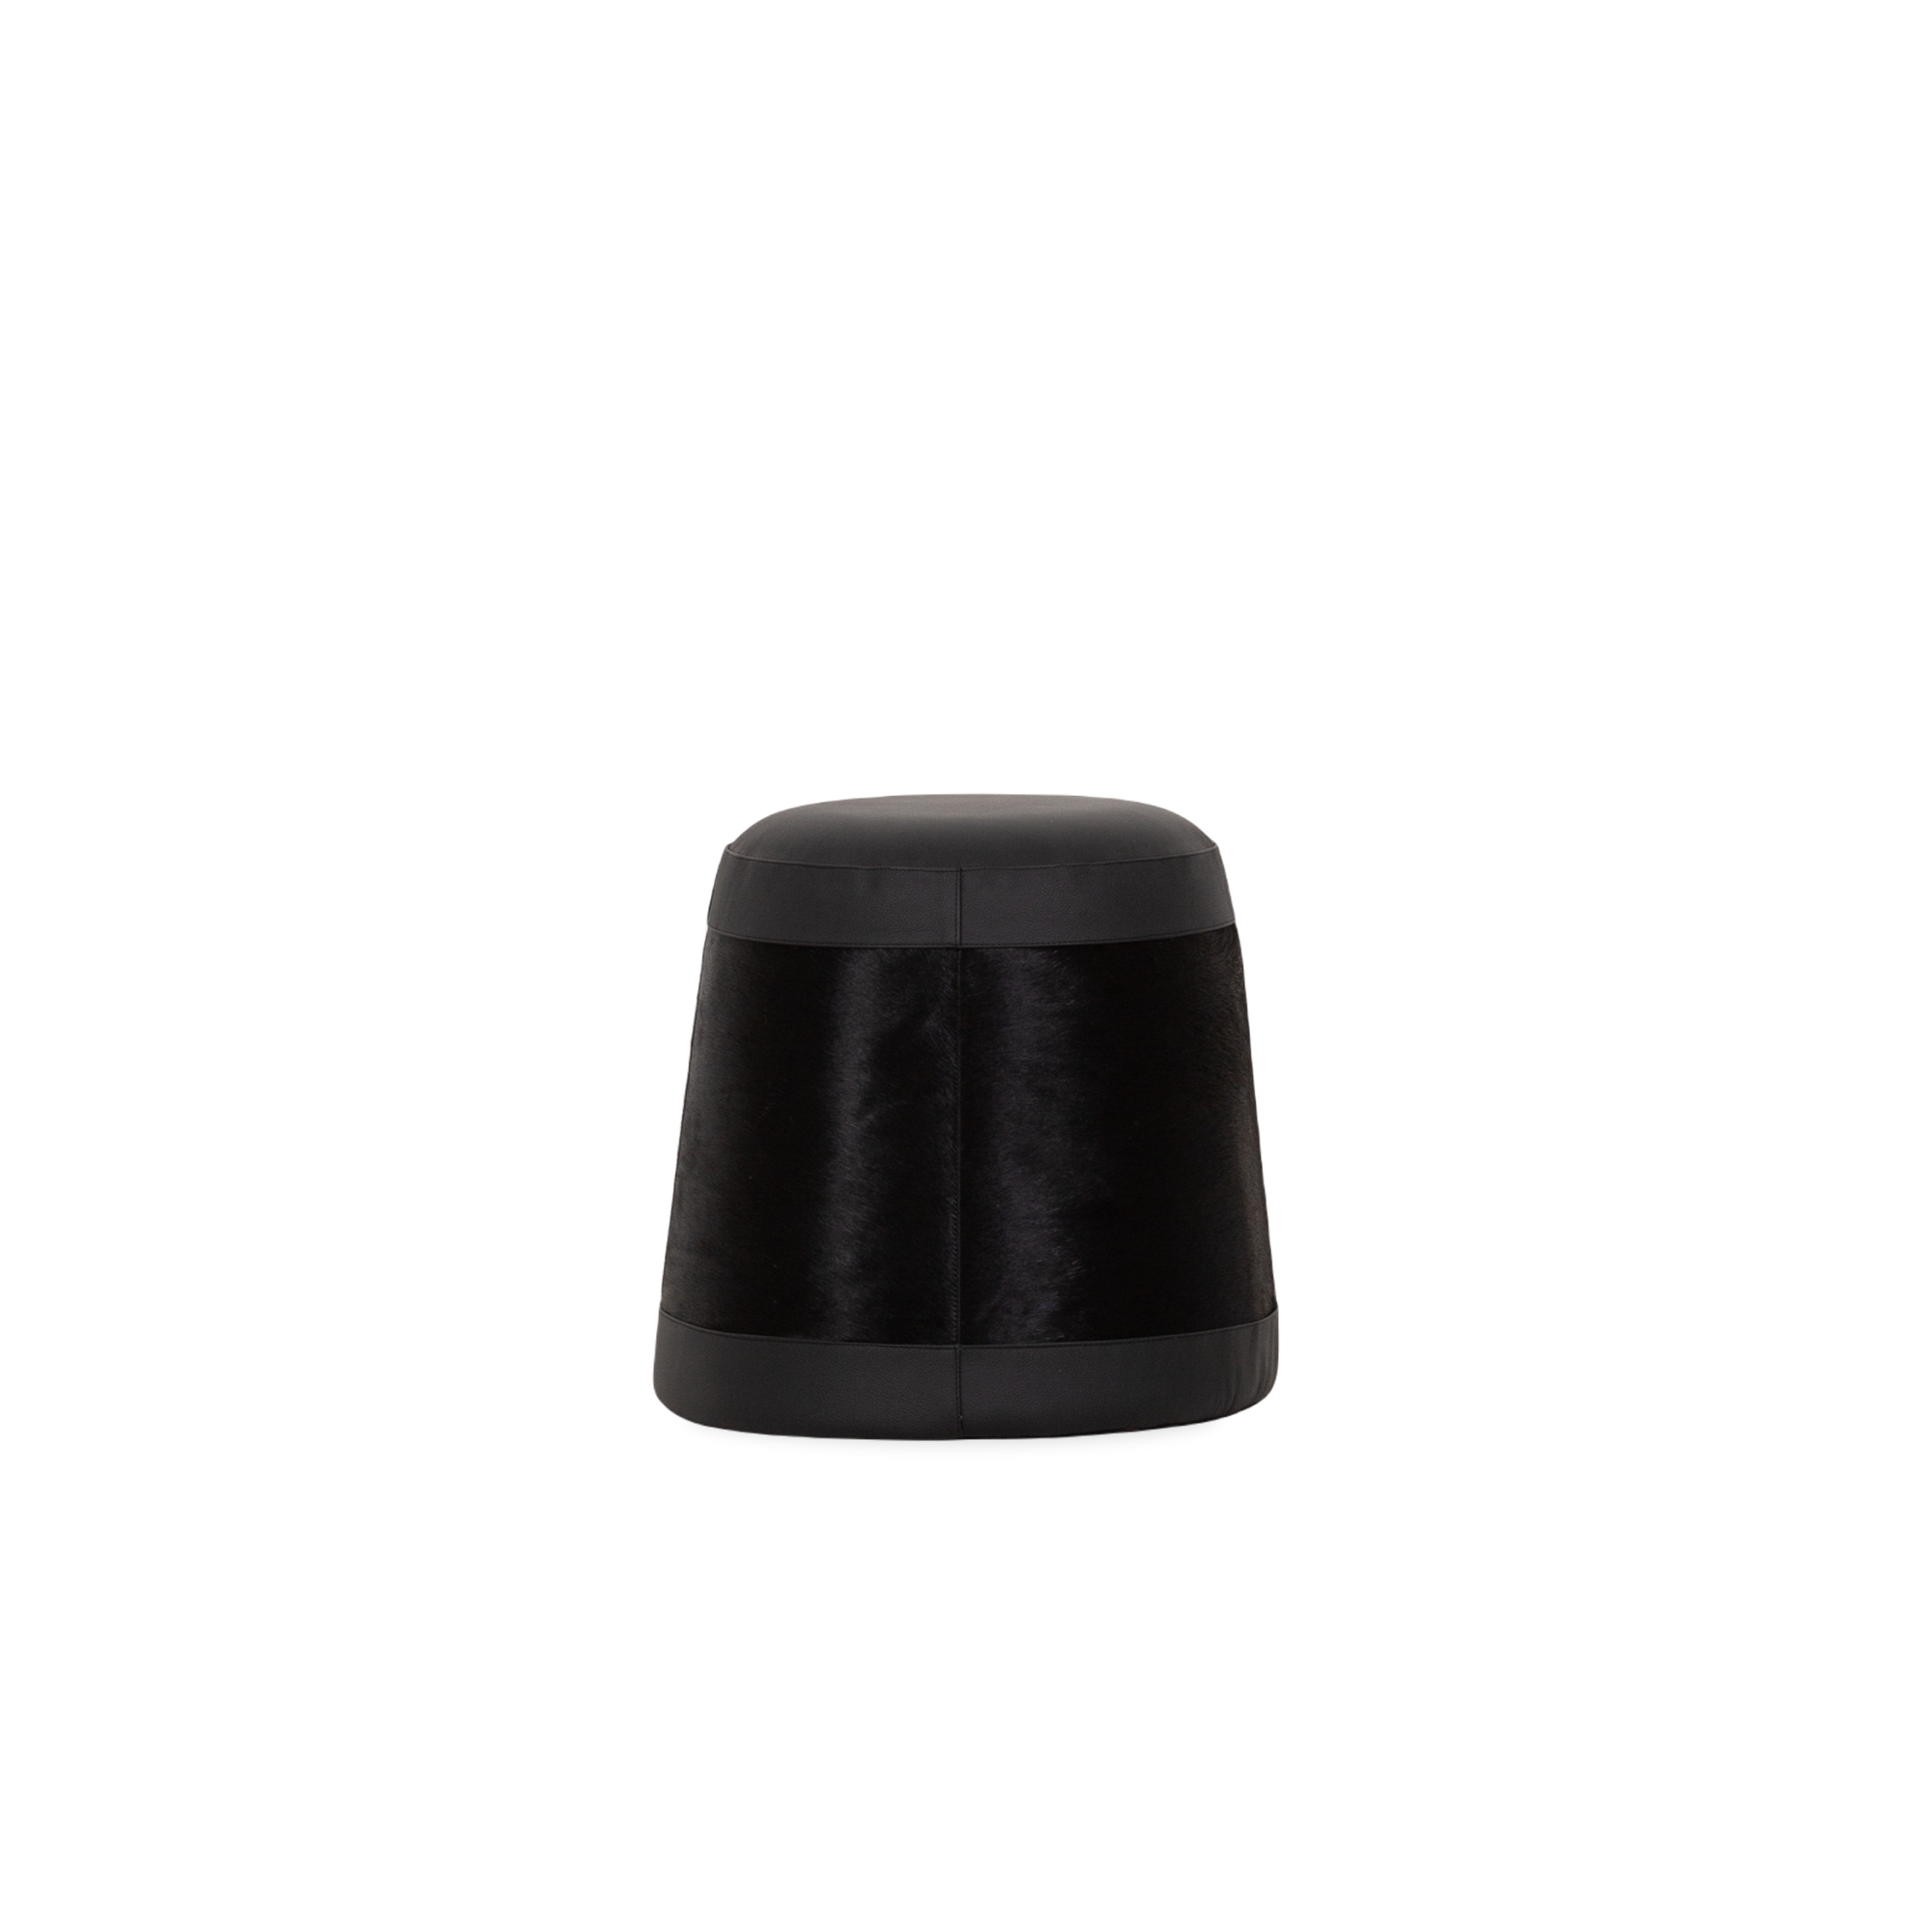 Handcrafted by artisans in India, the Hair-On-Hide Pouf is the perfect combination of form and function.